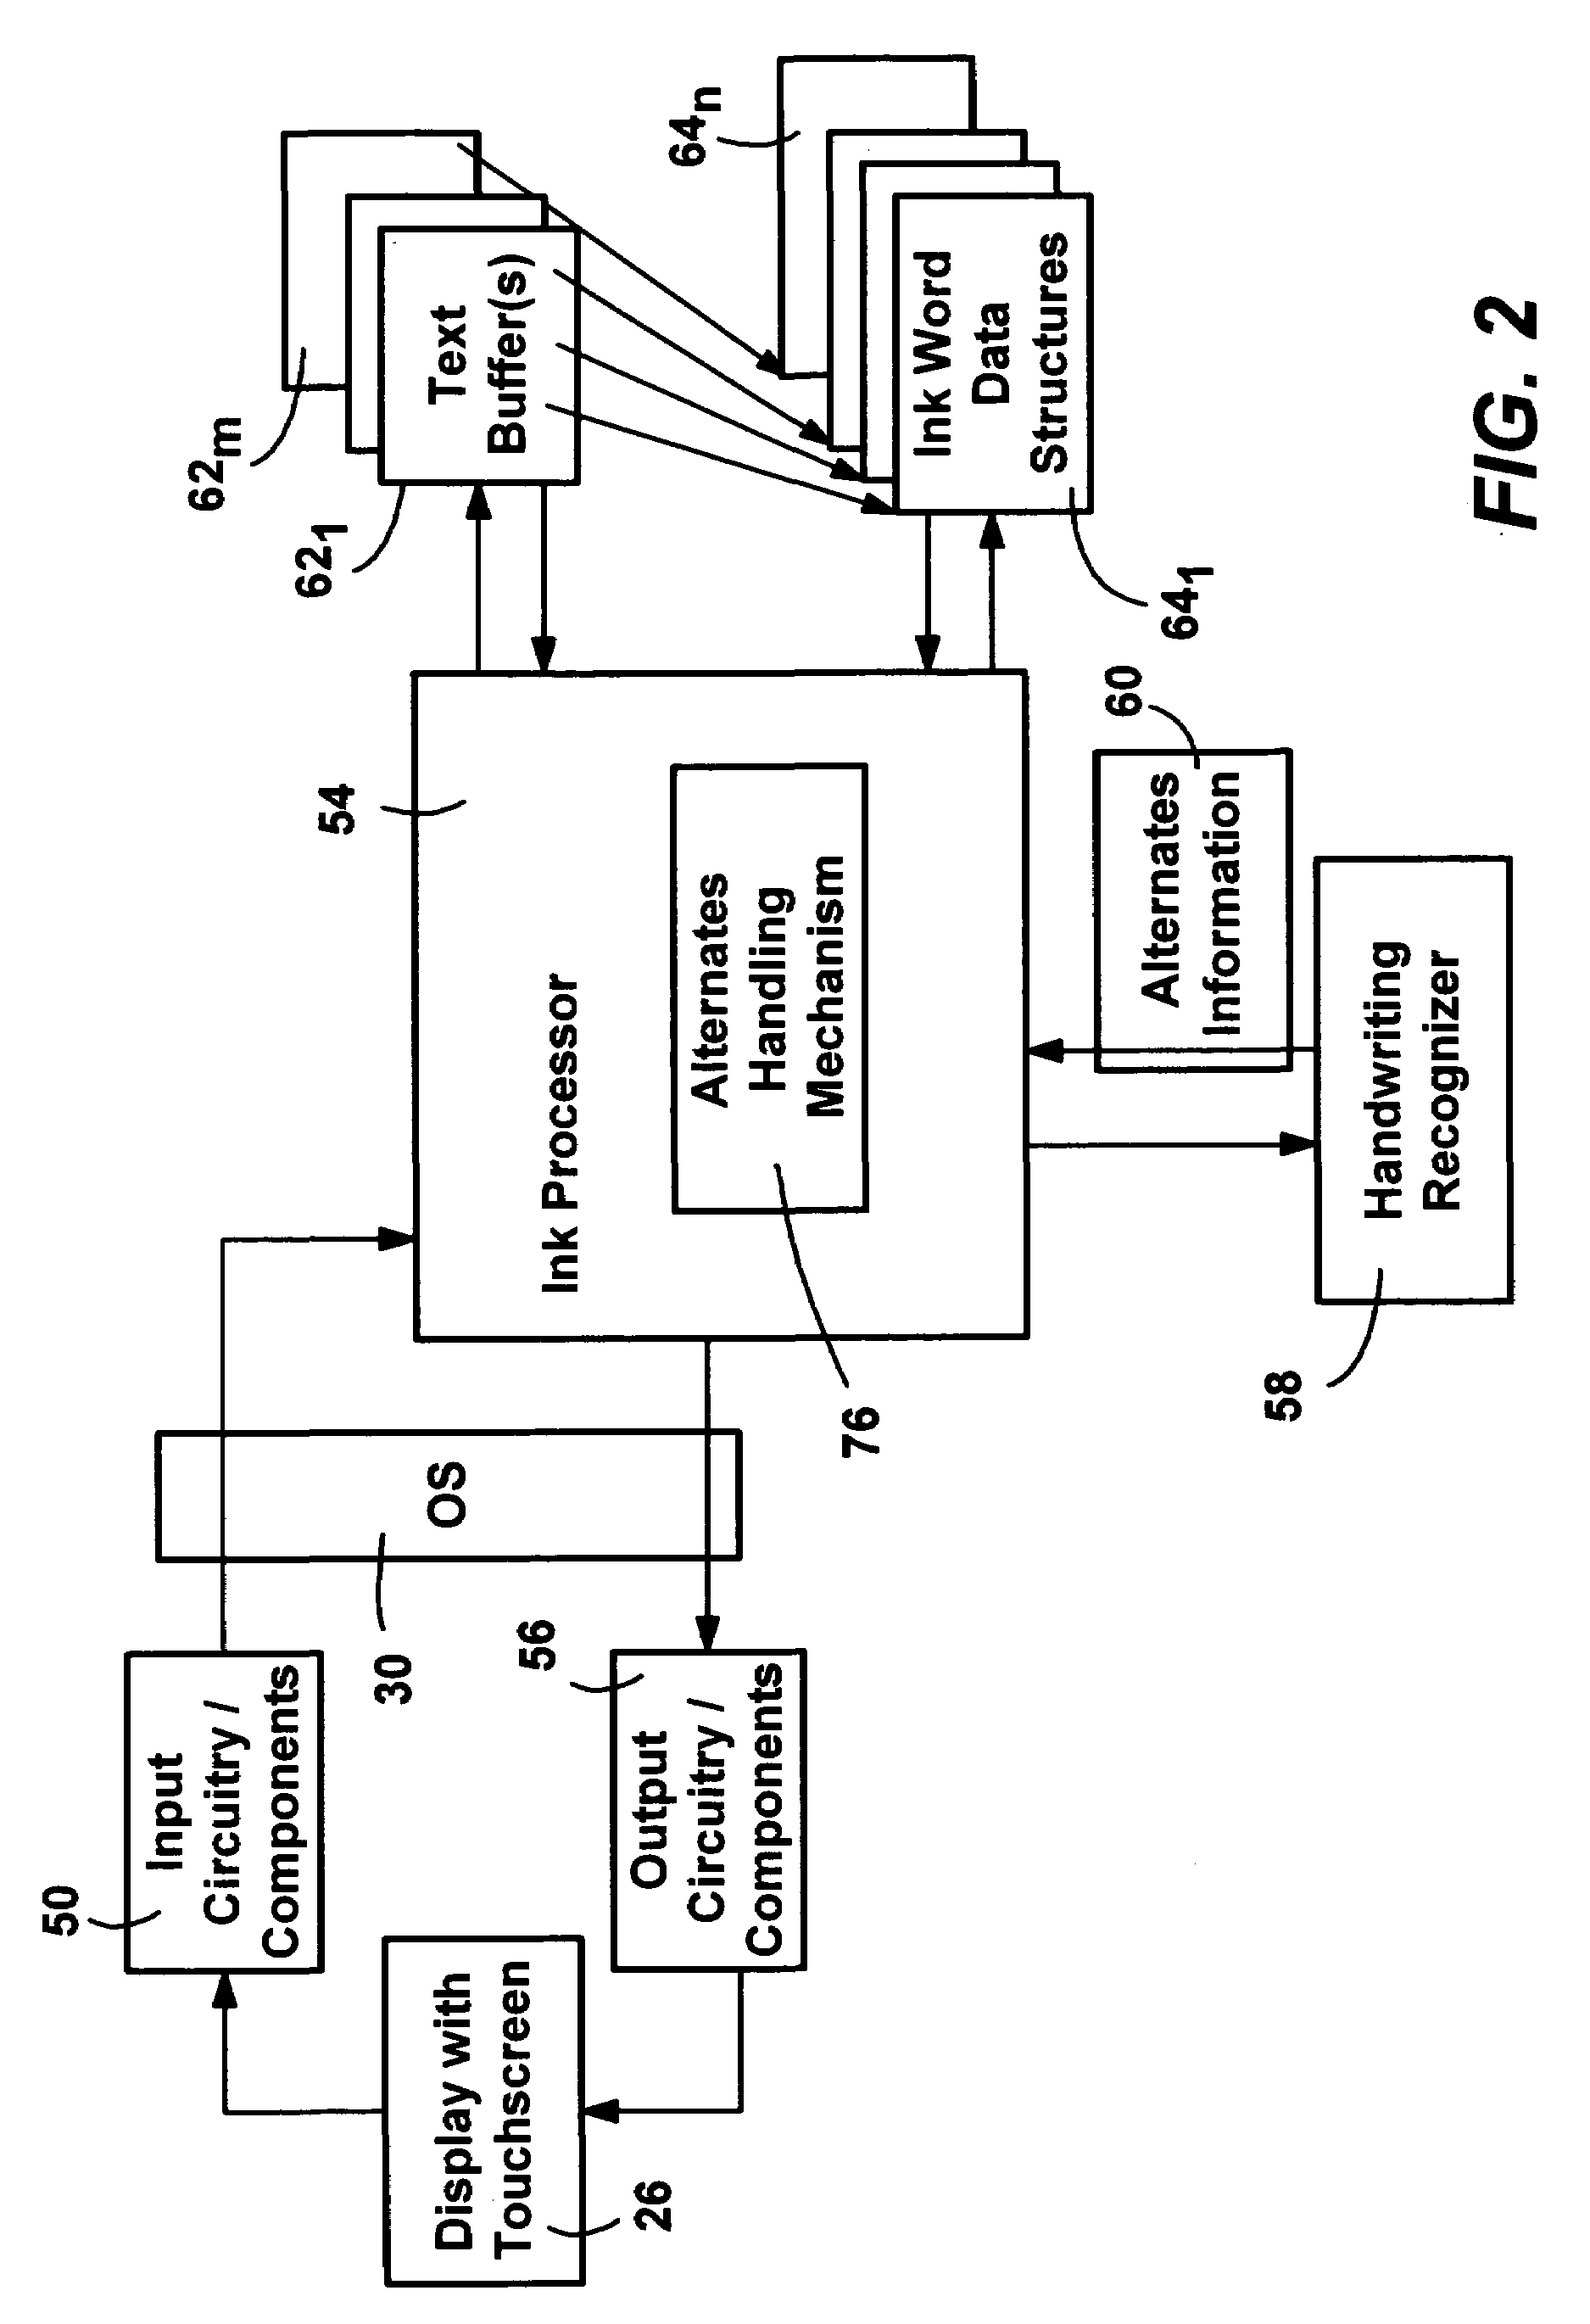 Method and system of handling the selection of alternates for recognized words